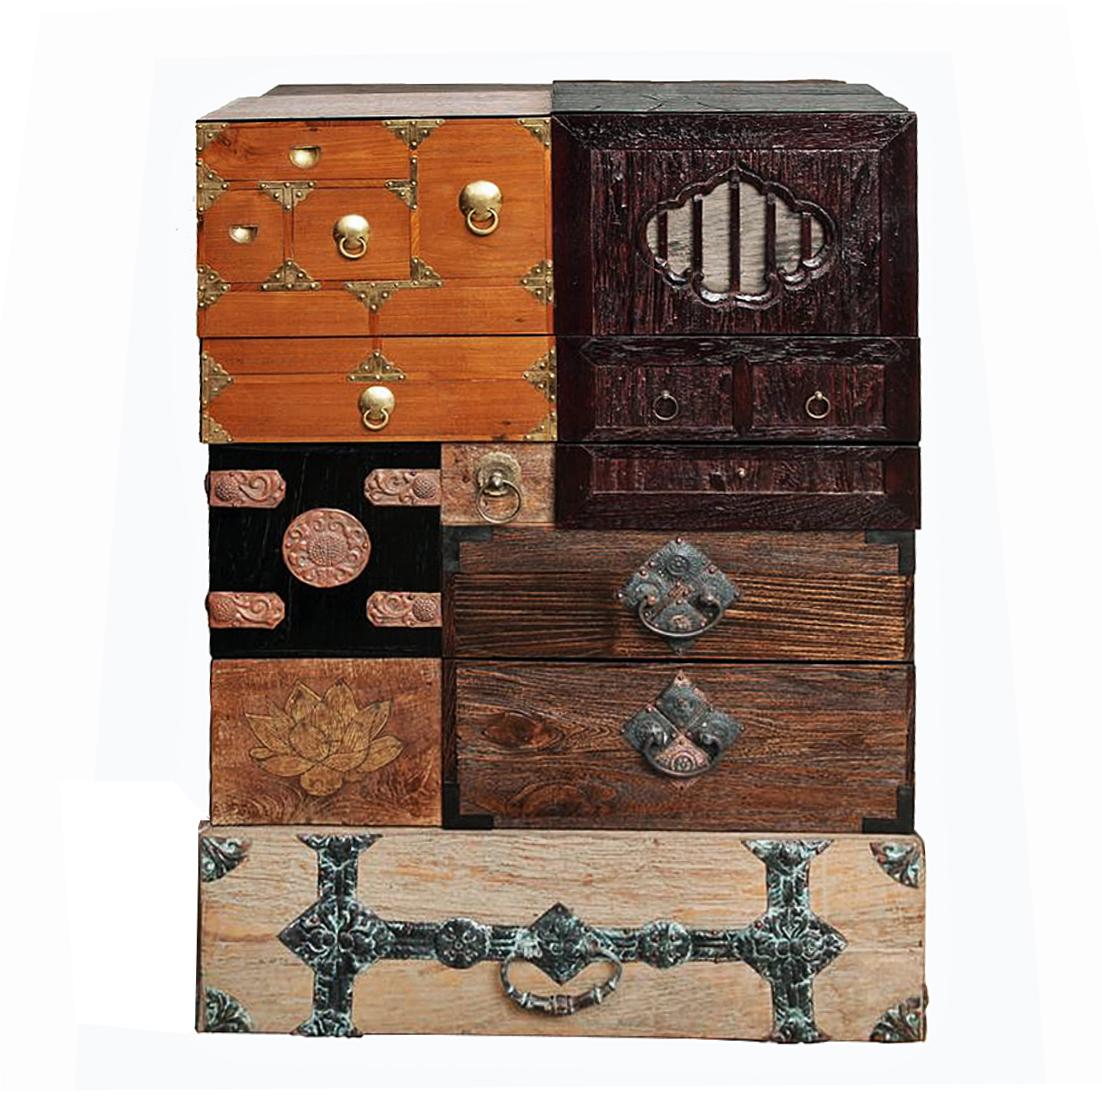 A chest with five drawers, by New York interior designer Vicente Wolf.

This one of a kind drawer chest was created by New York interior designer Vicente Wolf with rare hardware and wood finishes he personally curated during his travels around the